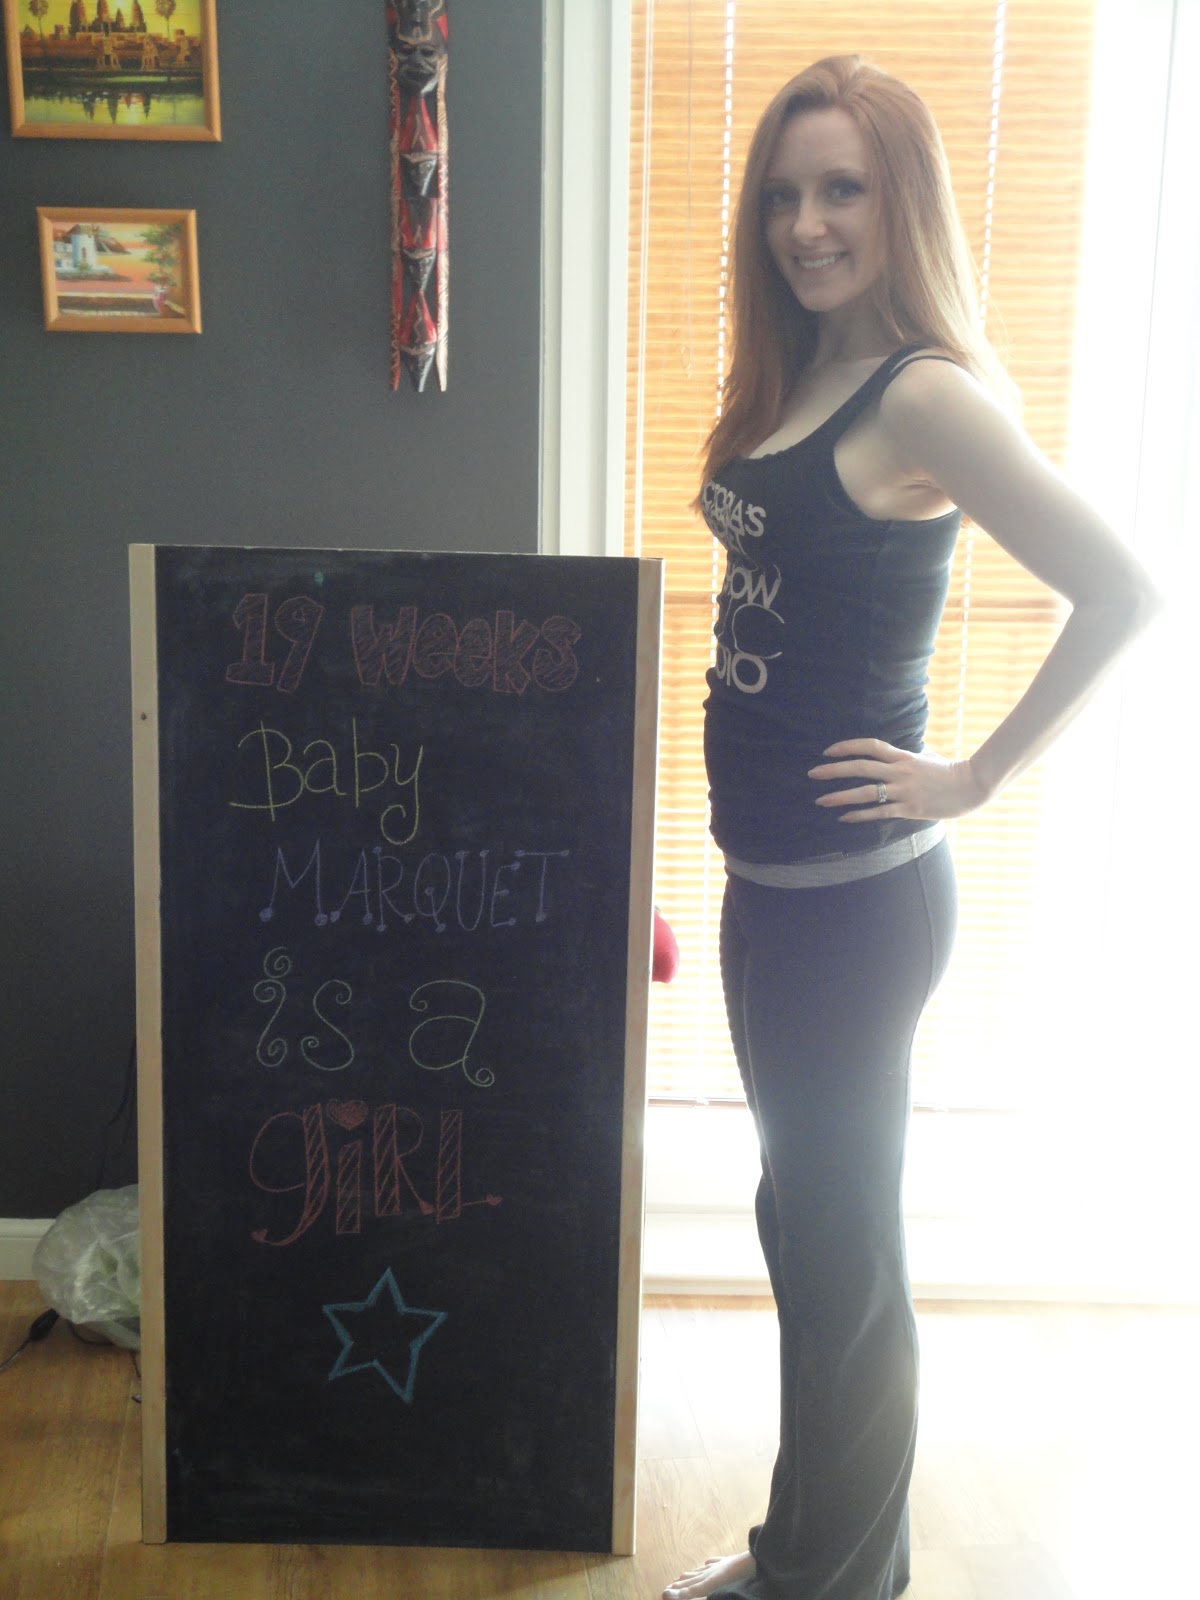 due date if 8 weeks pregnant